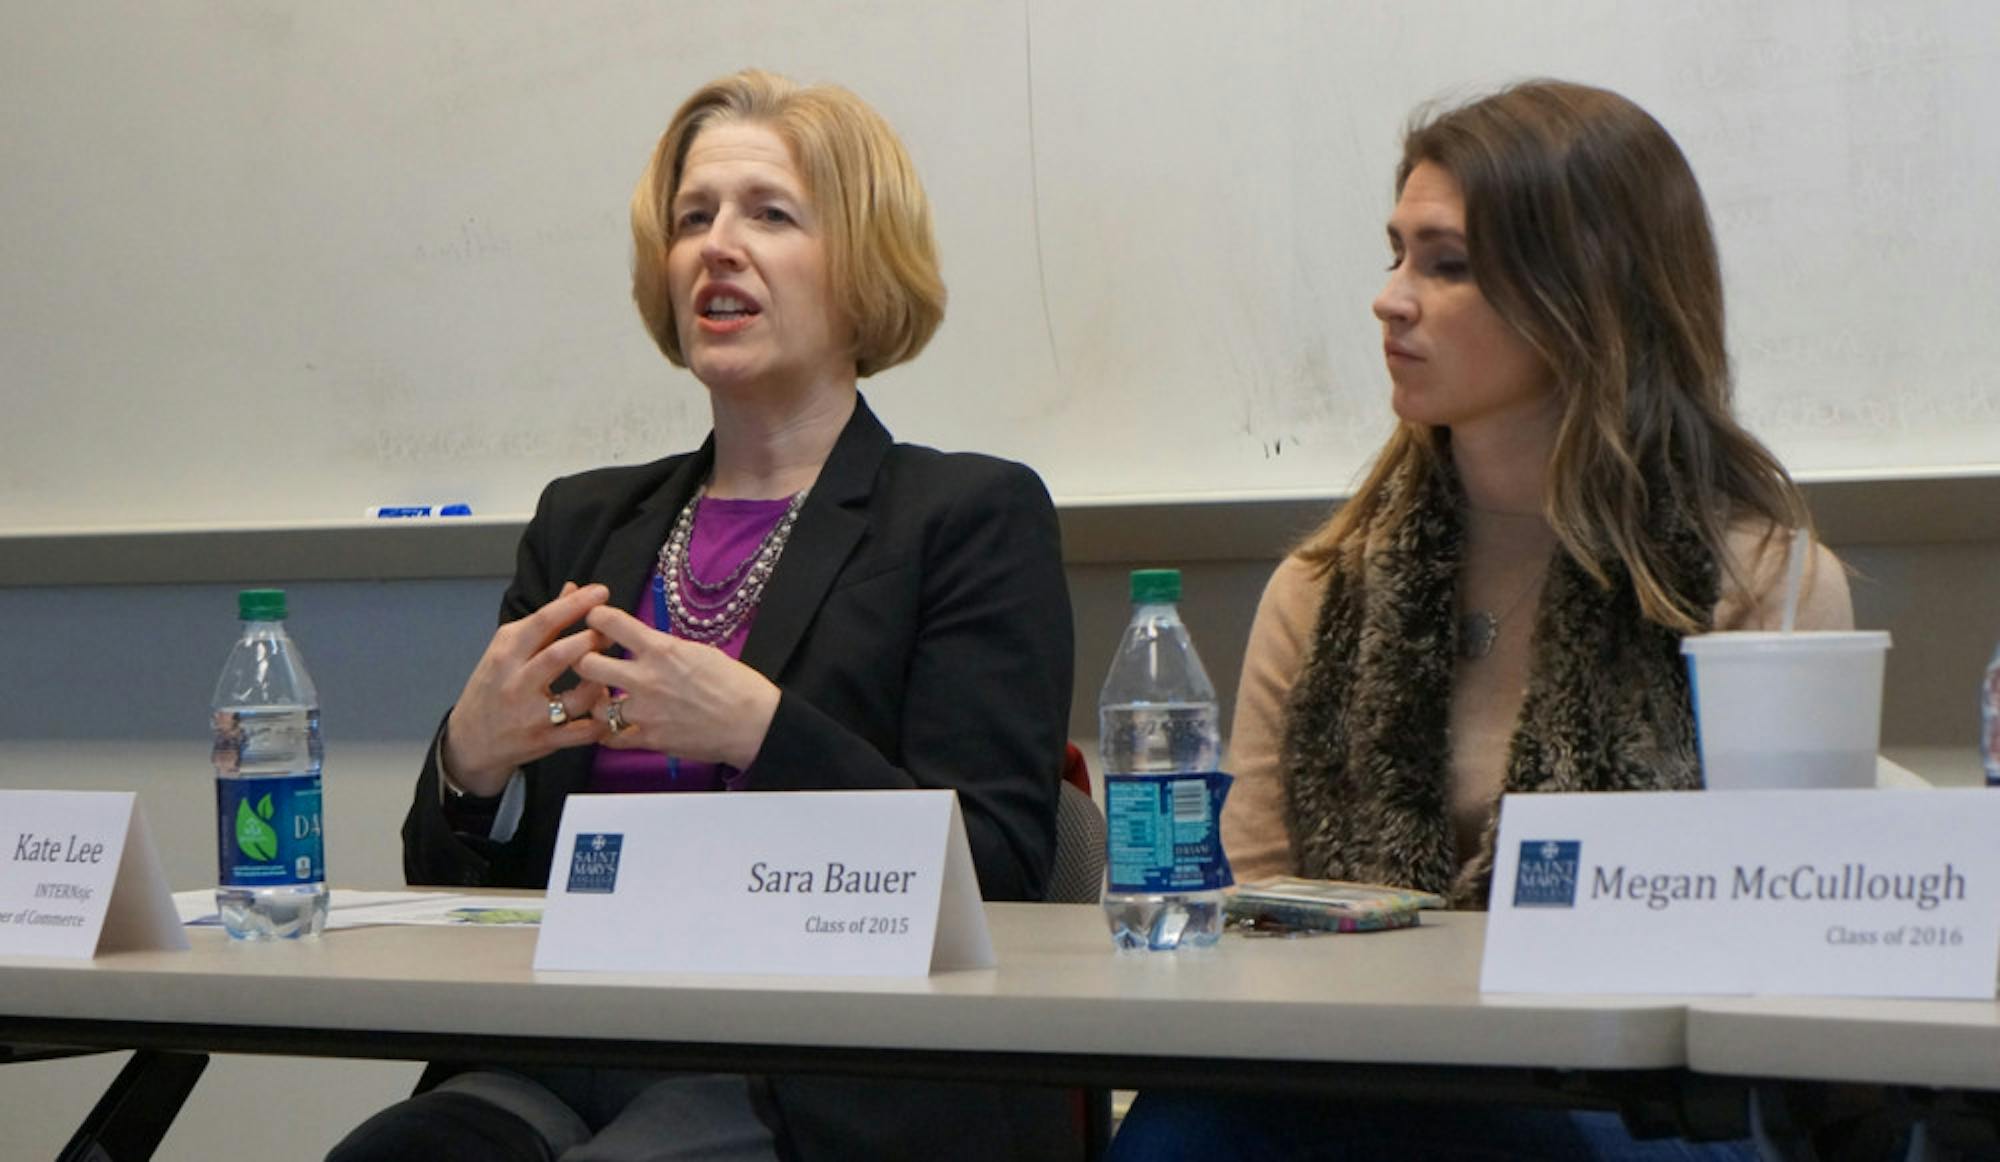 Organized by the Career Crossings Office and department of business and economics, an internship panel presented on Wednesday to educate students on landing proper internship positions.